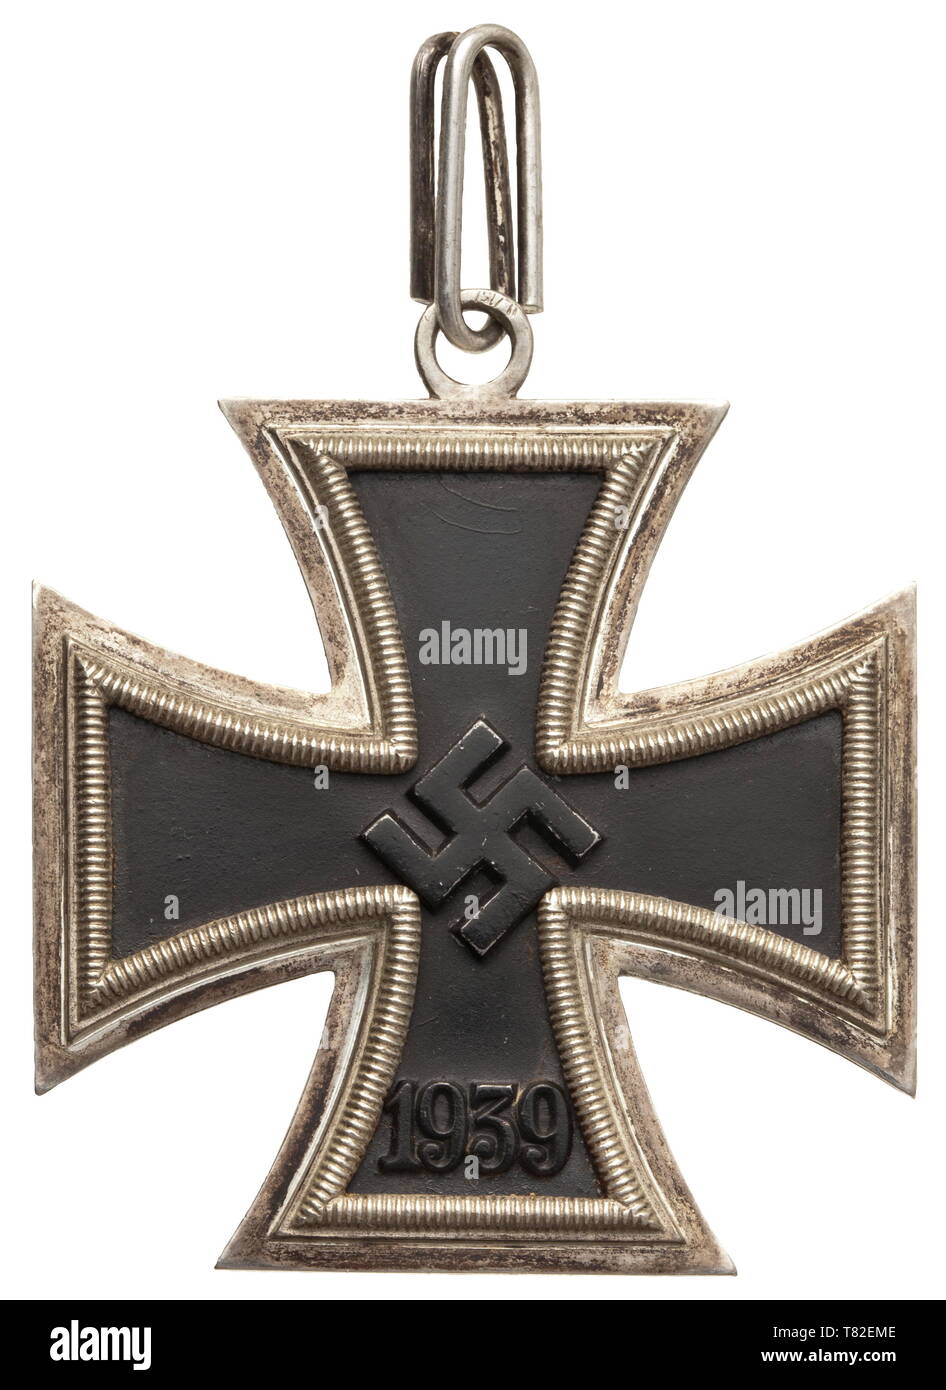 A Knight's Cross of the Iron Cross by maker Otto Schickle Nickel silver frame, blackened iron core, unmarked suspension ring typical of Schickle, the obverse of the eyelet with LDO punch mark 'L/15'. Weight 24.8 g. Dimensions without suspension ring 49 x 49 mm. Certainly one of the rarest Knight's Crosses, Otto Schickle produced these awards for just a short period of time (most probably only until 1941), thus these crosses are hardly ever seen on the market. Cf. Dietrich Maerz, 'Das Ritterkreuz des Eisernen Kreuzes und seine Höheren Stufen'. historic, historical, awards, a, Editorial-Use-Only Stock Photo